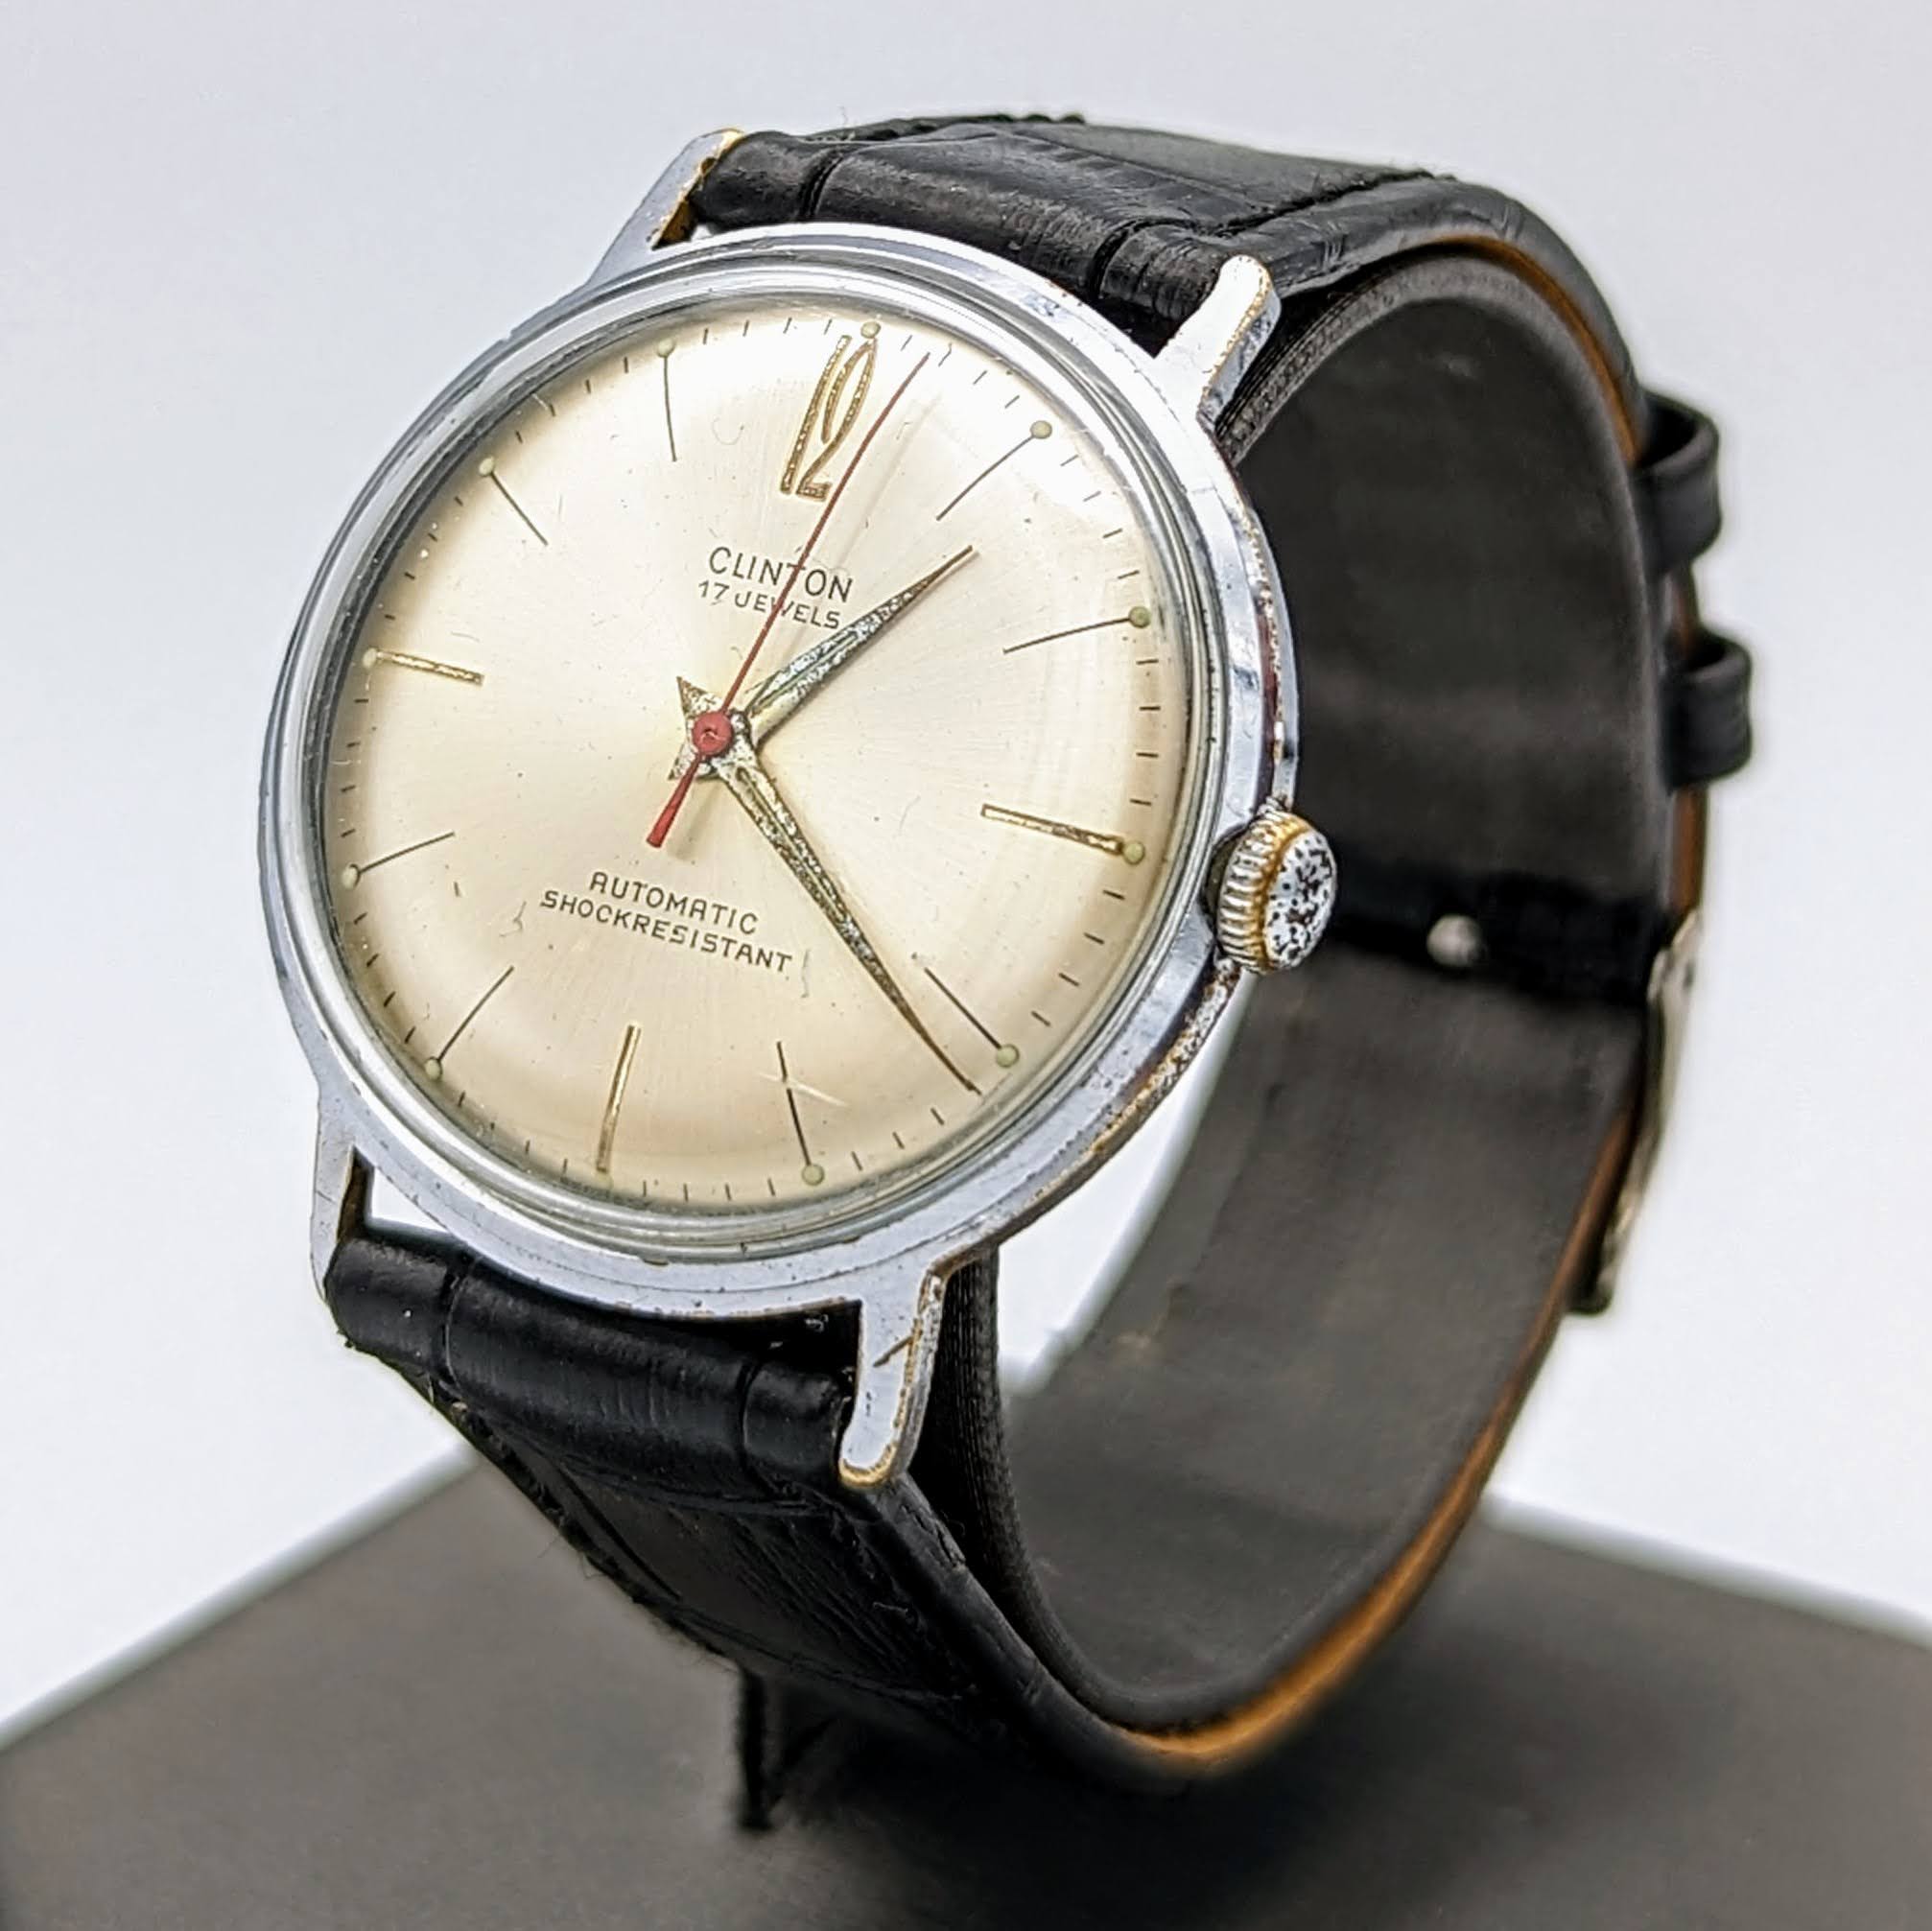 CLINTON Automatic Watch 17 Jewels Germany Made Vintage Wristwatch